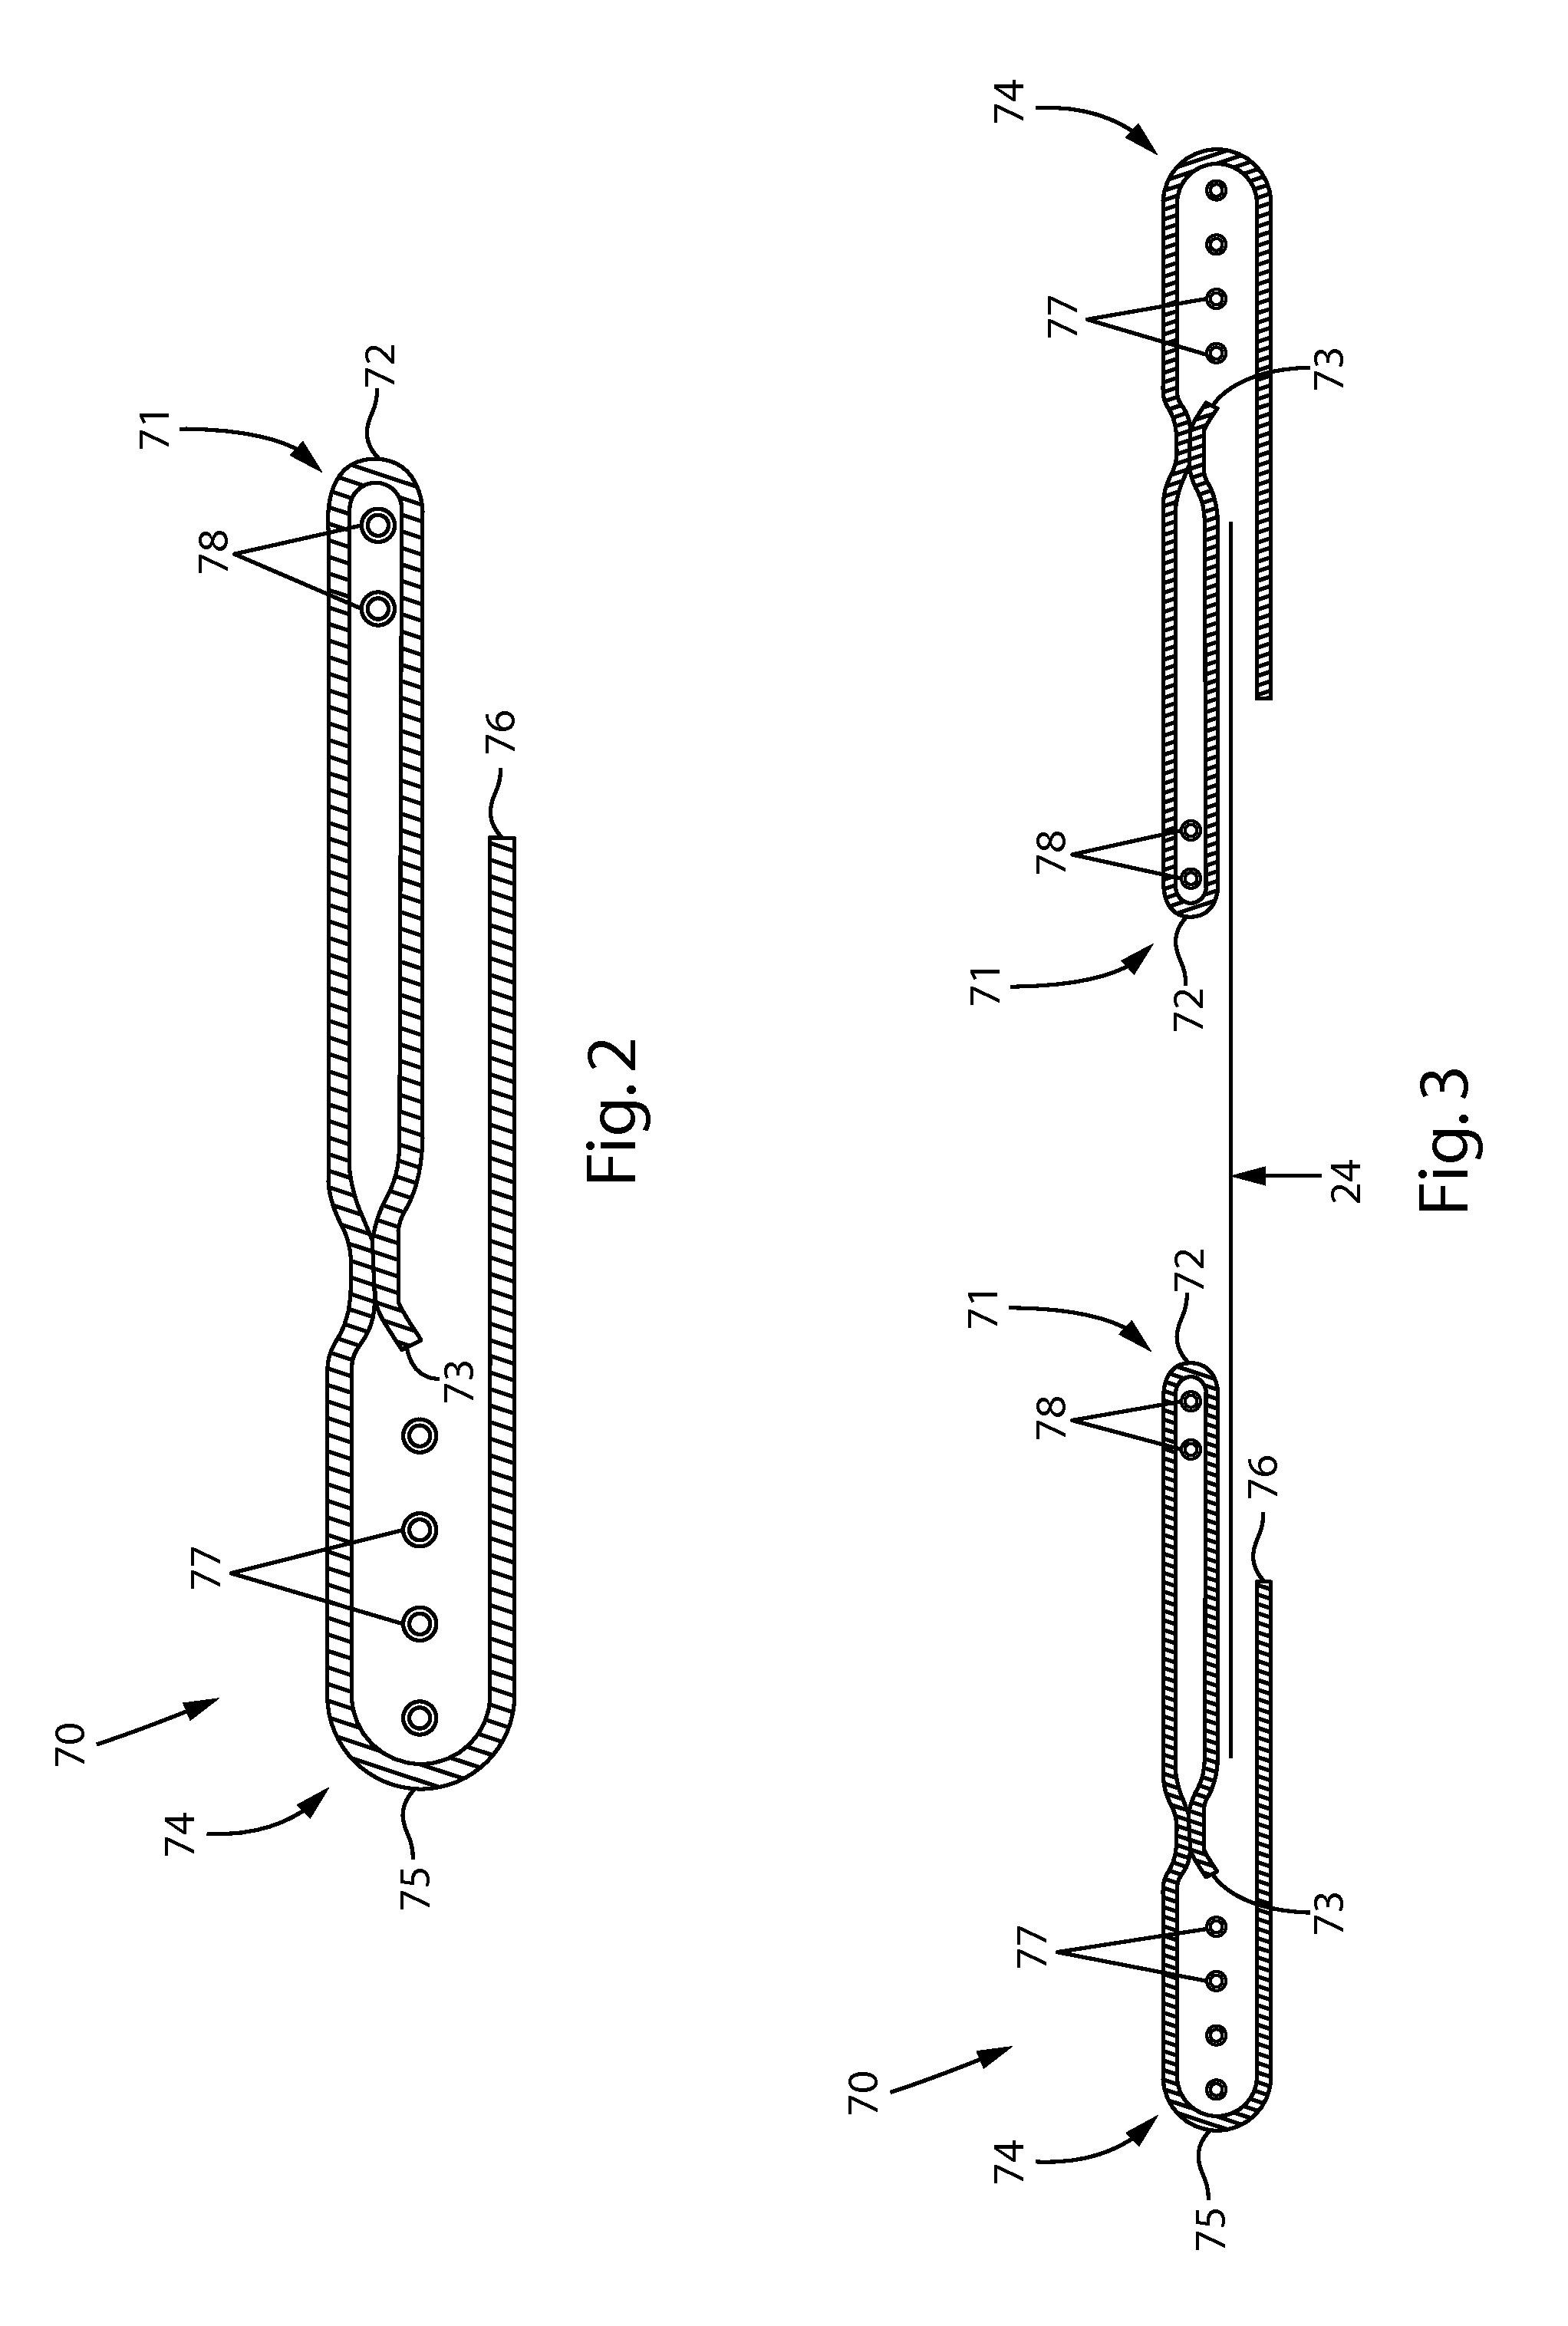 Absorbent Article With Leg Gasketing Cuff